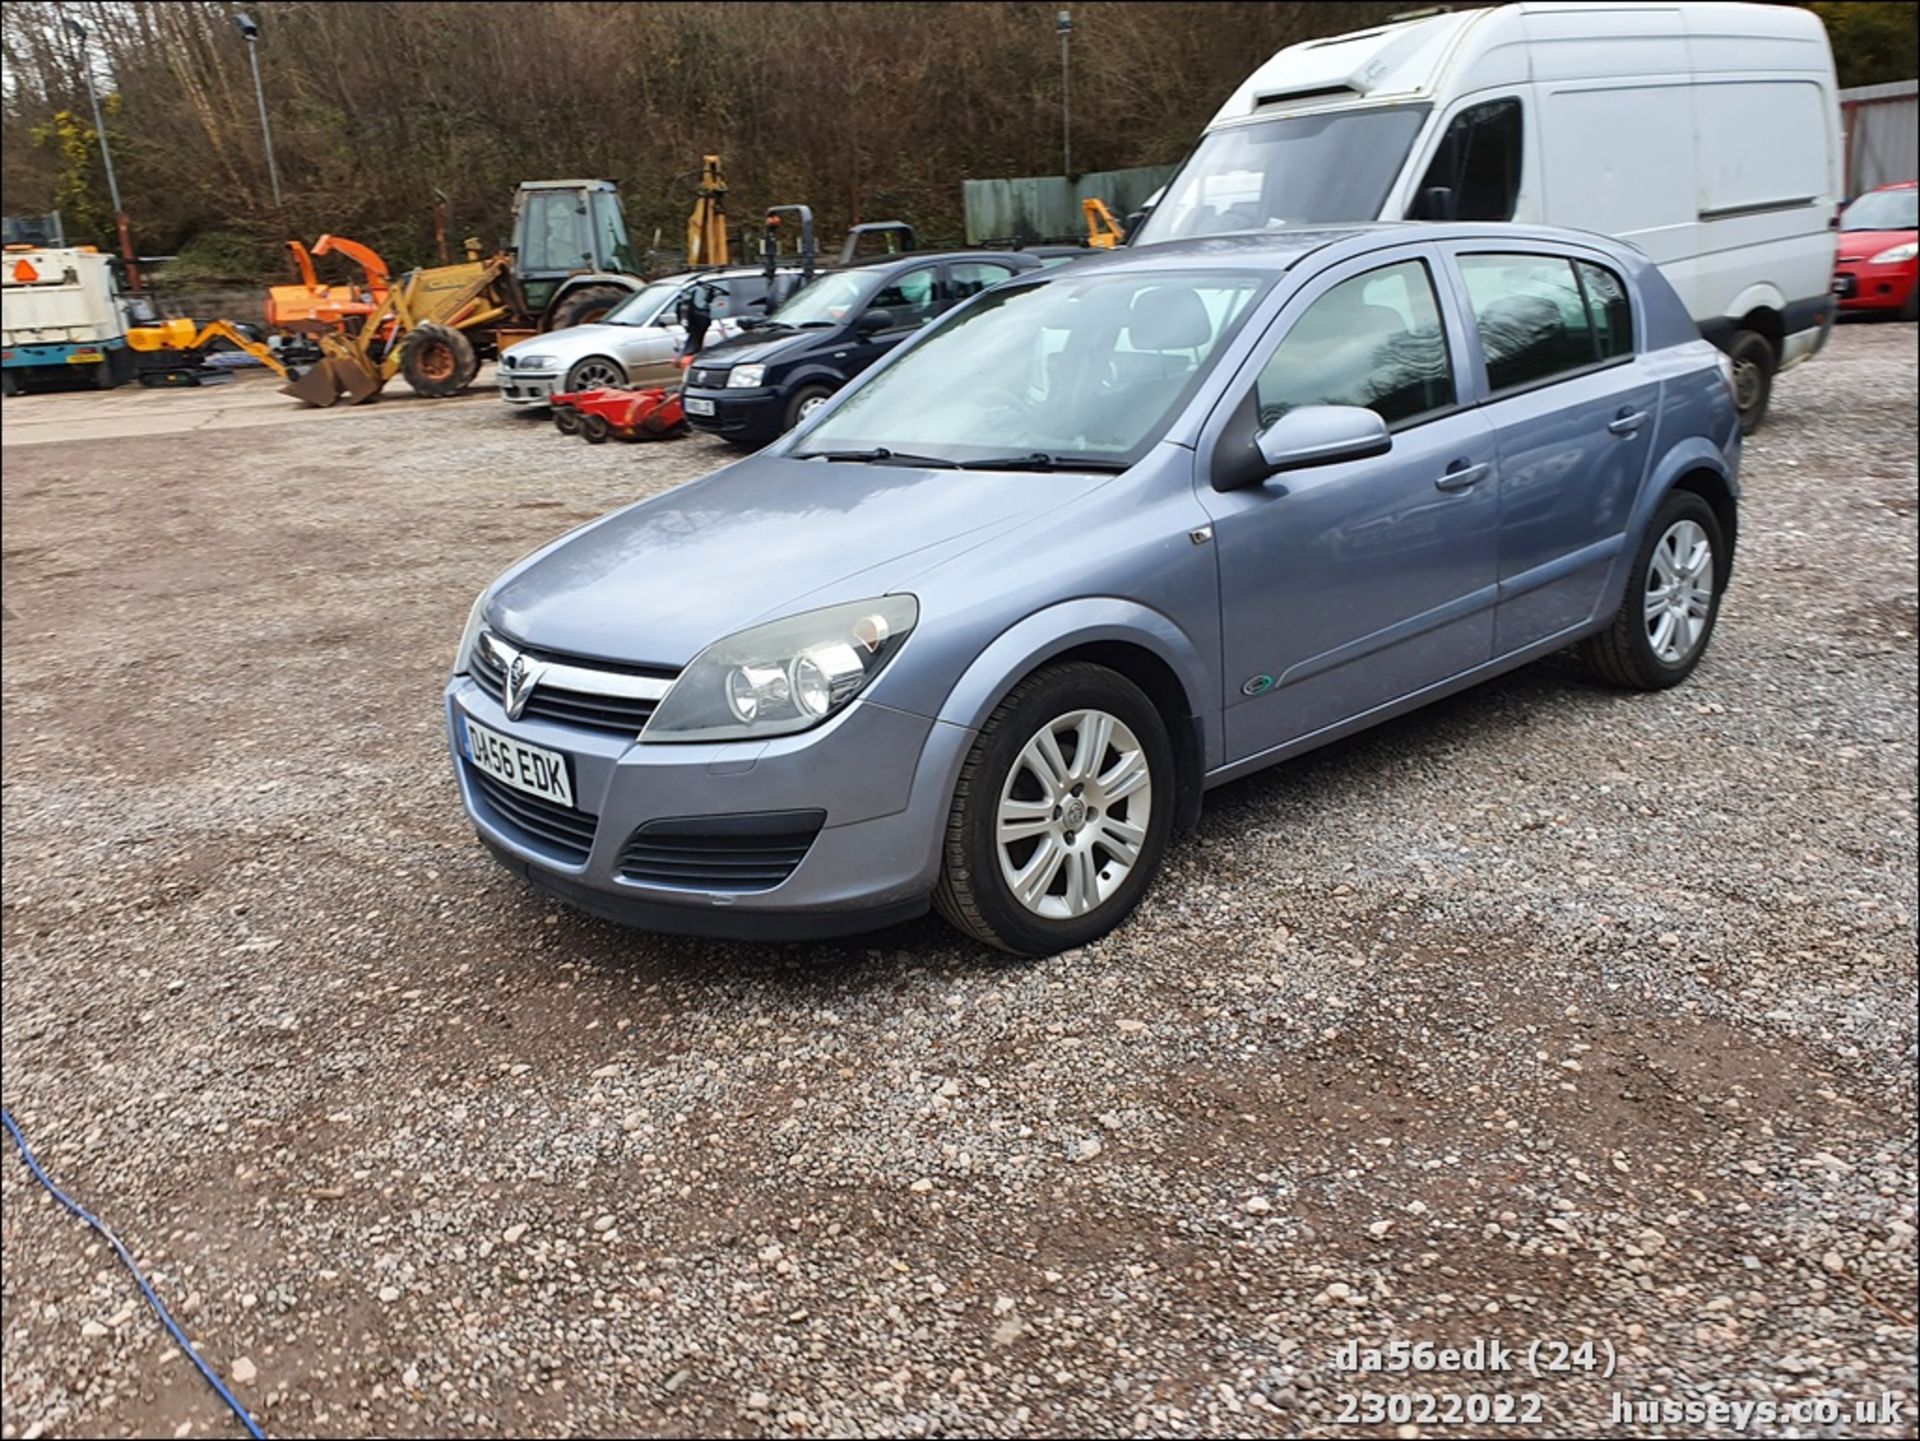 06/56 VAUXHALL ASTRA ACTIVE - 1598cc 5dr Hatchback (Silver) - Image 23 of 42